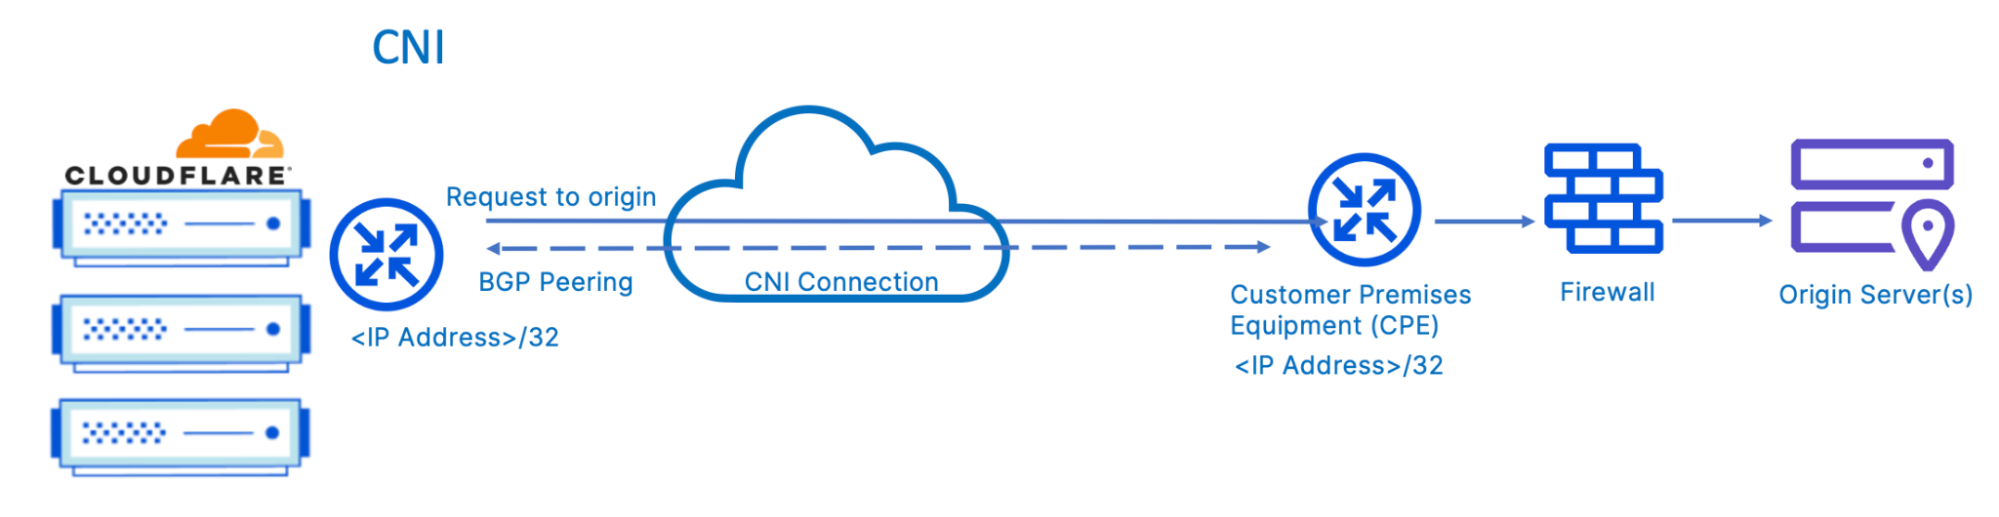 Cloudflare provides application performance and security services over a direct connection, Cloudflare Network Interconnect.